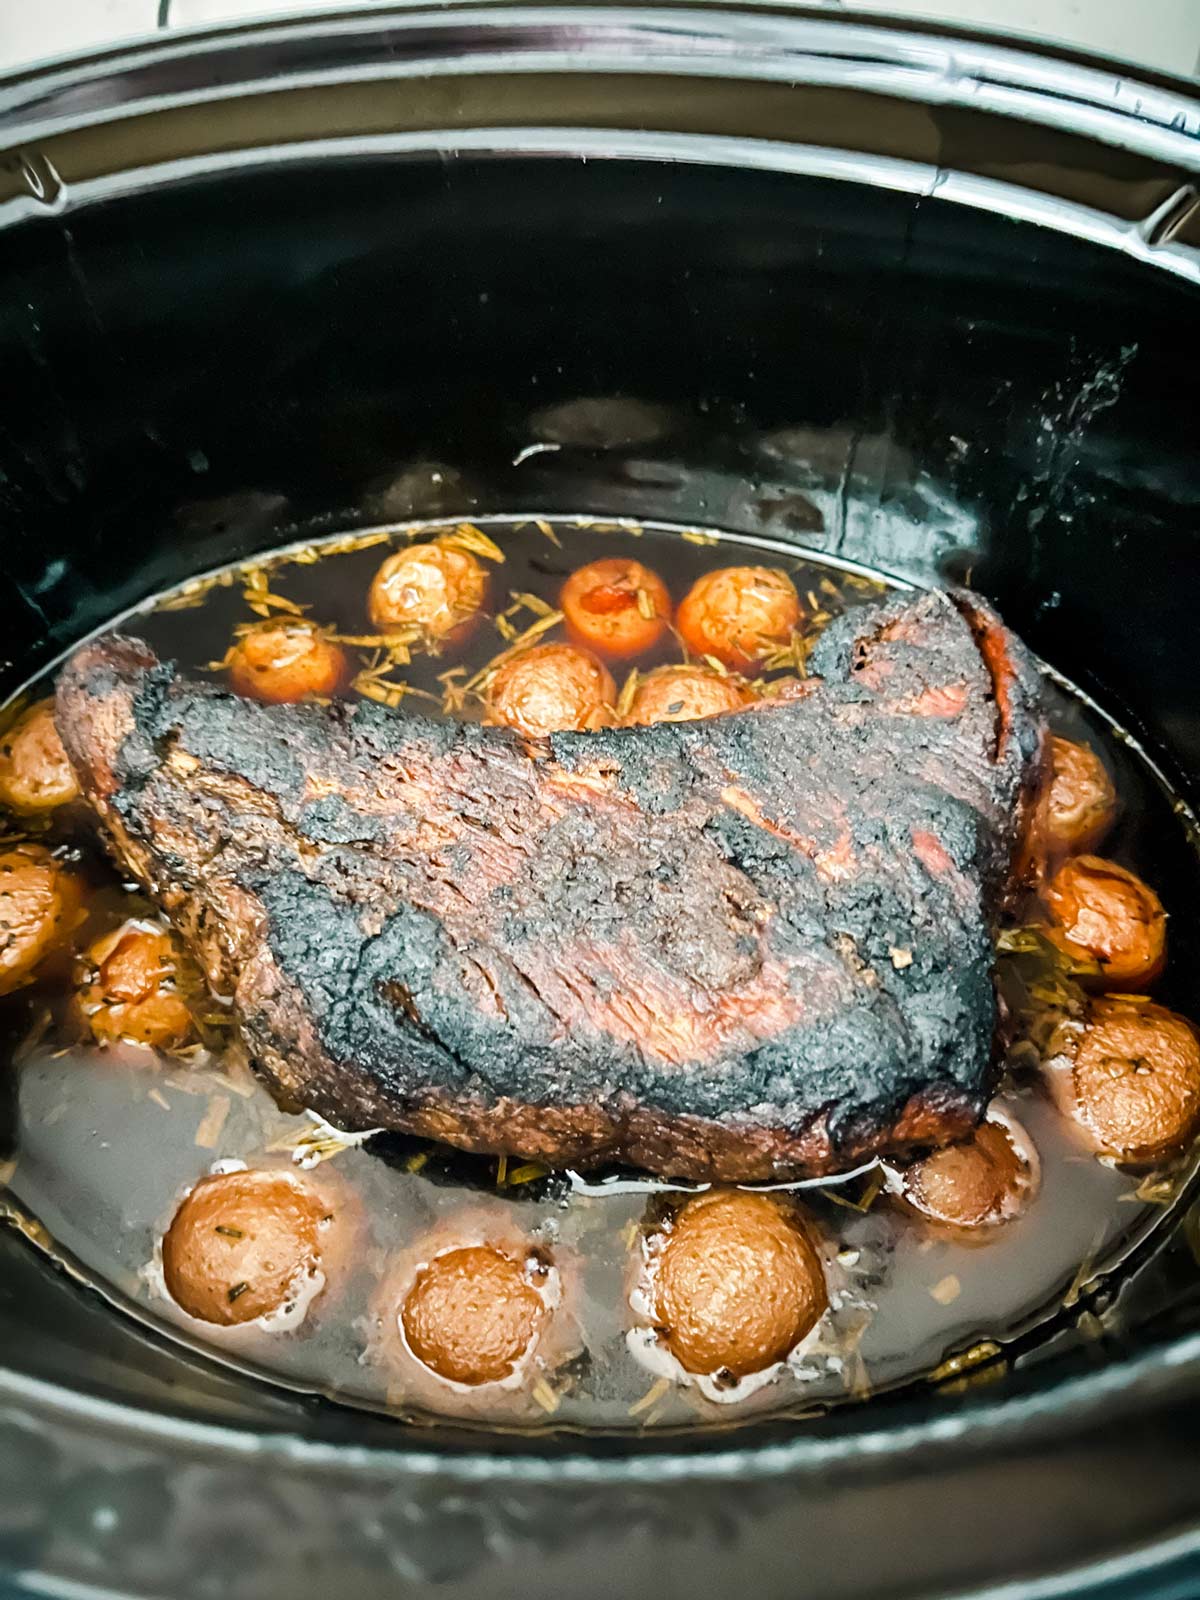 A slow cooker tri tip ready to cook.